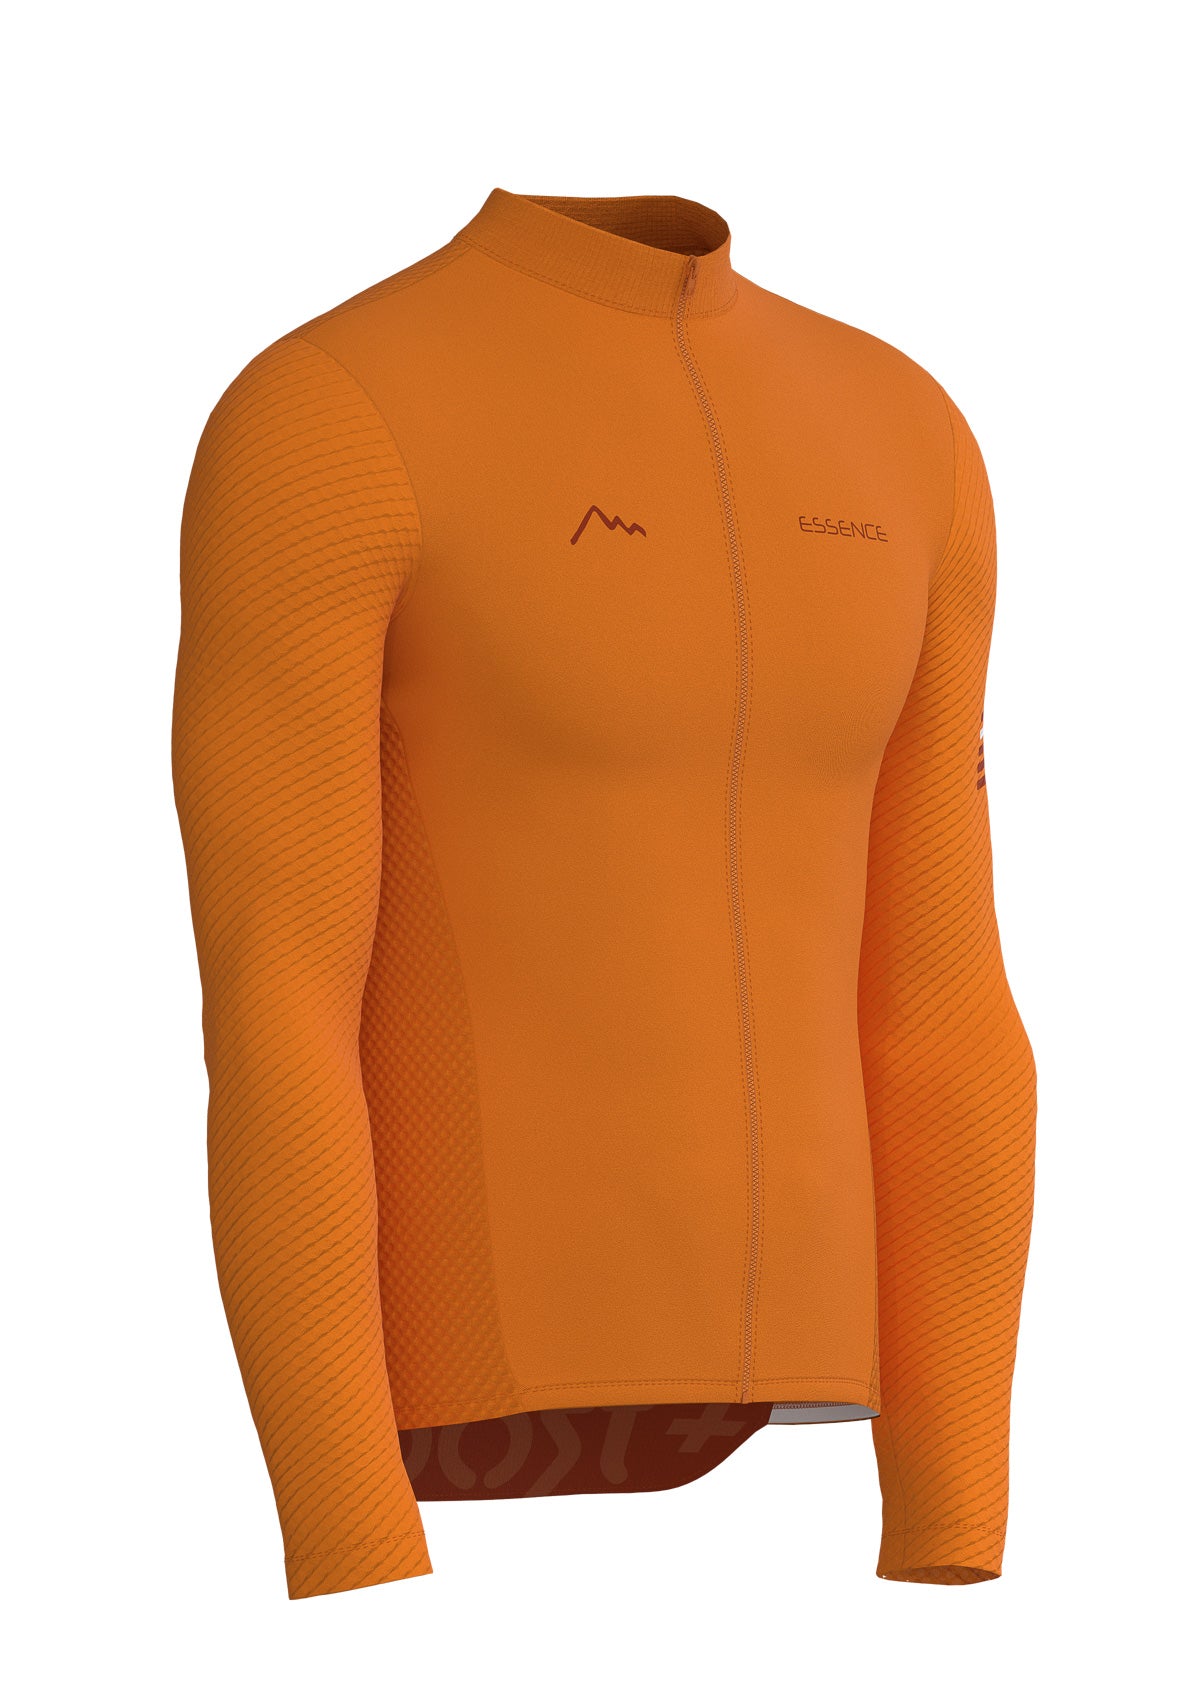 Essence Boost long sleeve cycling jersey